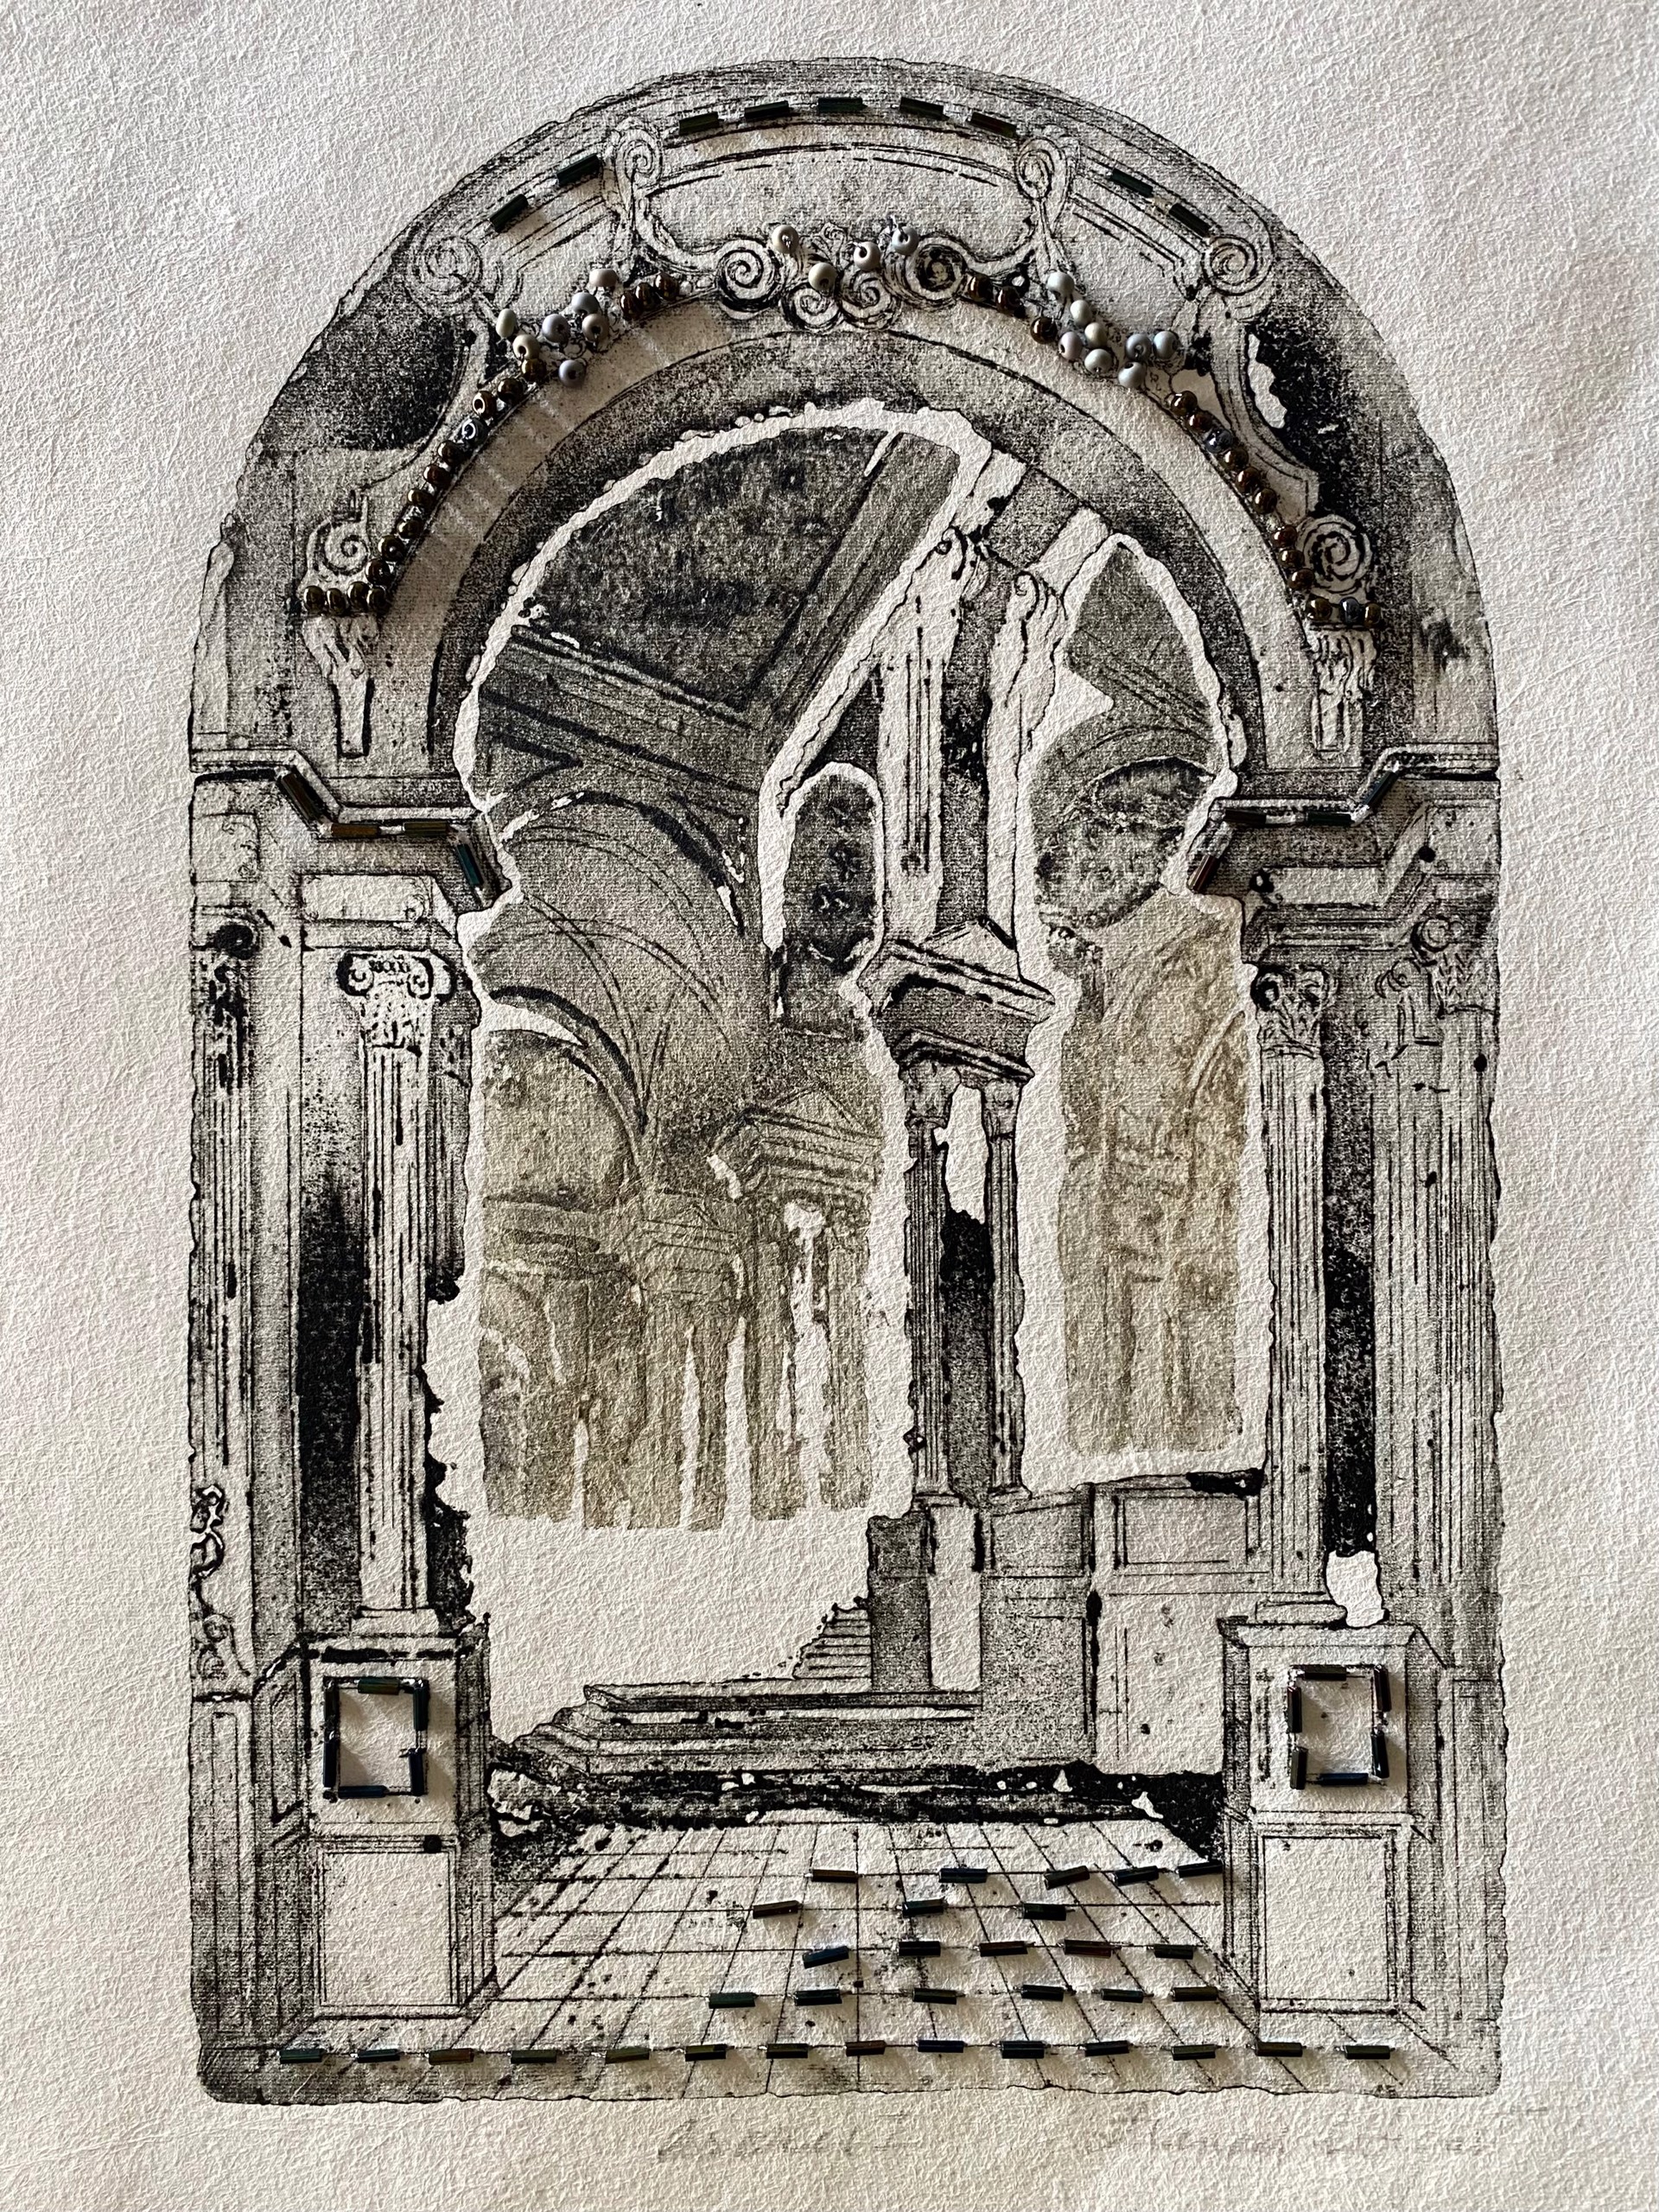 Arches I by Frances Swigart